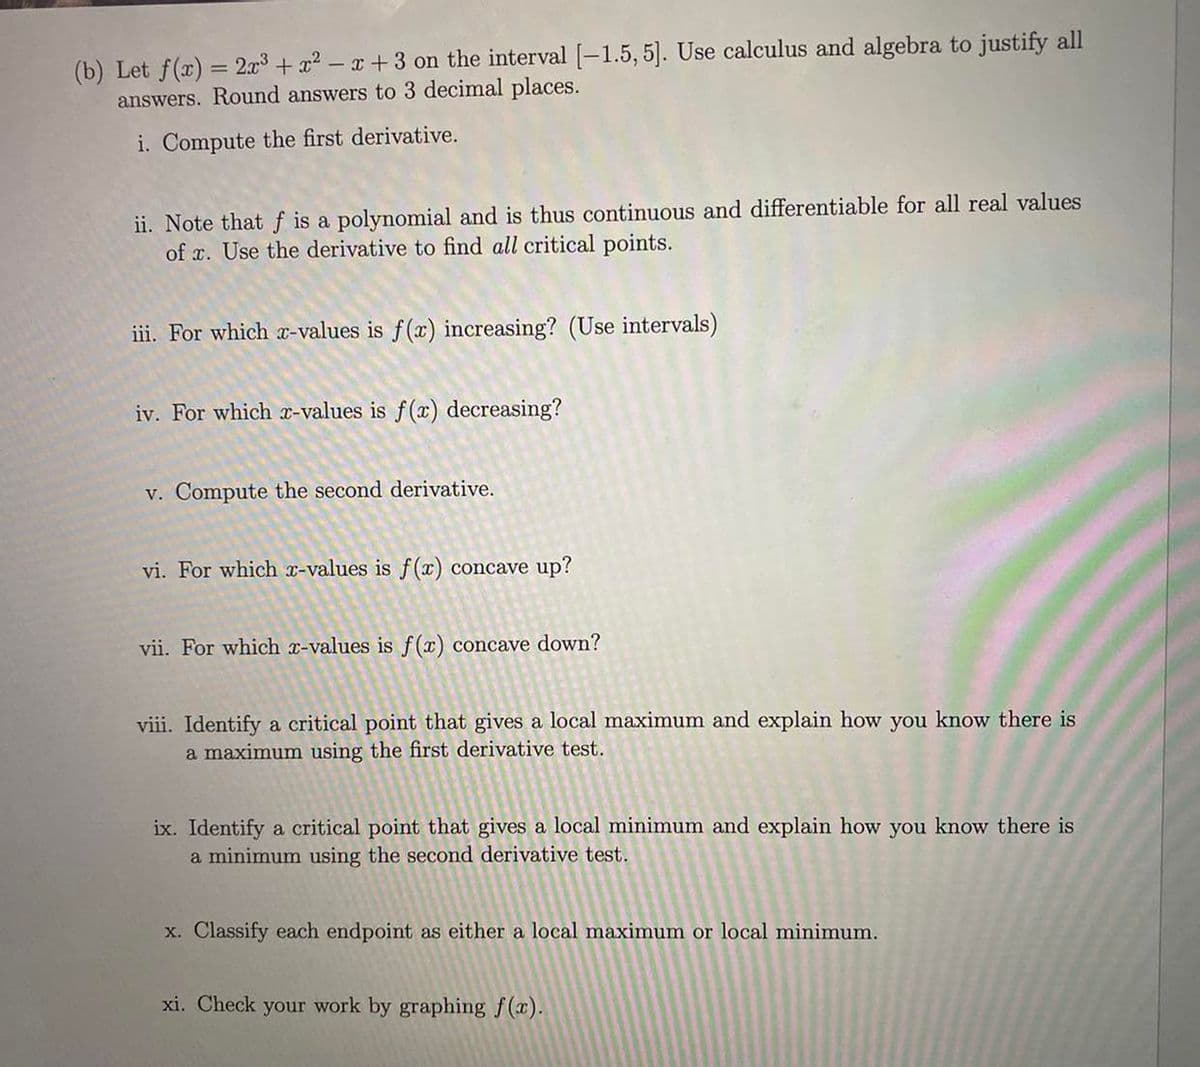 (b) Let f(x) = 2x³ + x²-x+3 on the interval [-1.5, 5]. Use calculus and algebra to justify all
answers. Round answers to 3 decimal places.
i. Compute the first derivative.
ii. Note that f is a polynomial and is thus continuous and differentiable for all real values
of x. Use the derivative to find all critical points.
iii. For which x-values is f(x) increasing? (Use intervals)
iv. For which x-values is f(x) decreasing?
v. Compute the second derivative.
vi. For which x-values is f(x) concave up?
vii. For which x-values is f(x) concave down?
viii. Identify a critical point that gives a local maximum and explain how you know there is
a maximum using the first derivative test.
ix. Identify a critical point that gives a local minimum and explain how you know there is
a minimum using the second derivative test.
x. Classify each endpoint as either a local maximum or local minimum.
xi. Check your work by graphing f(x).